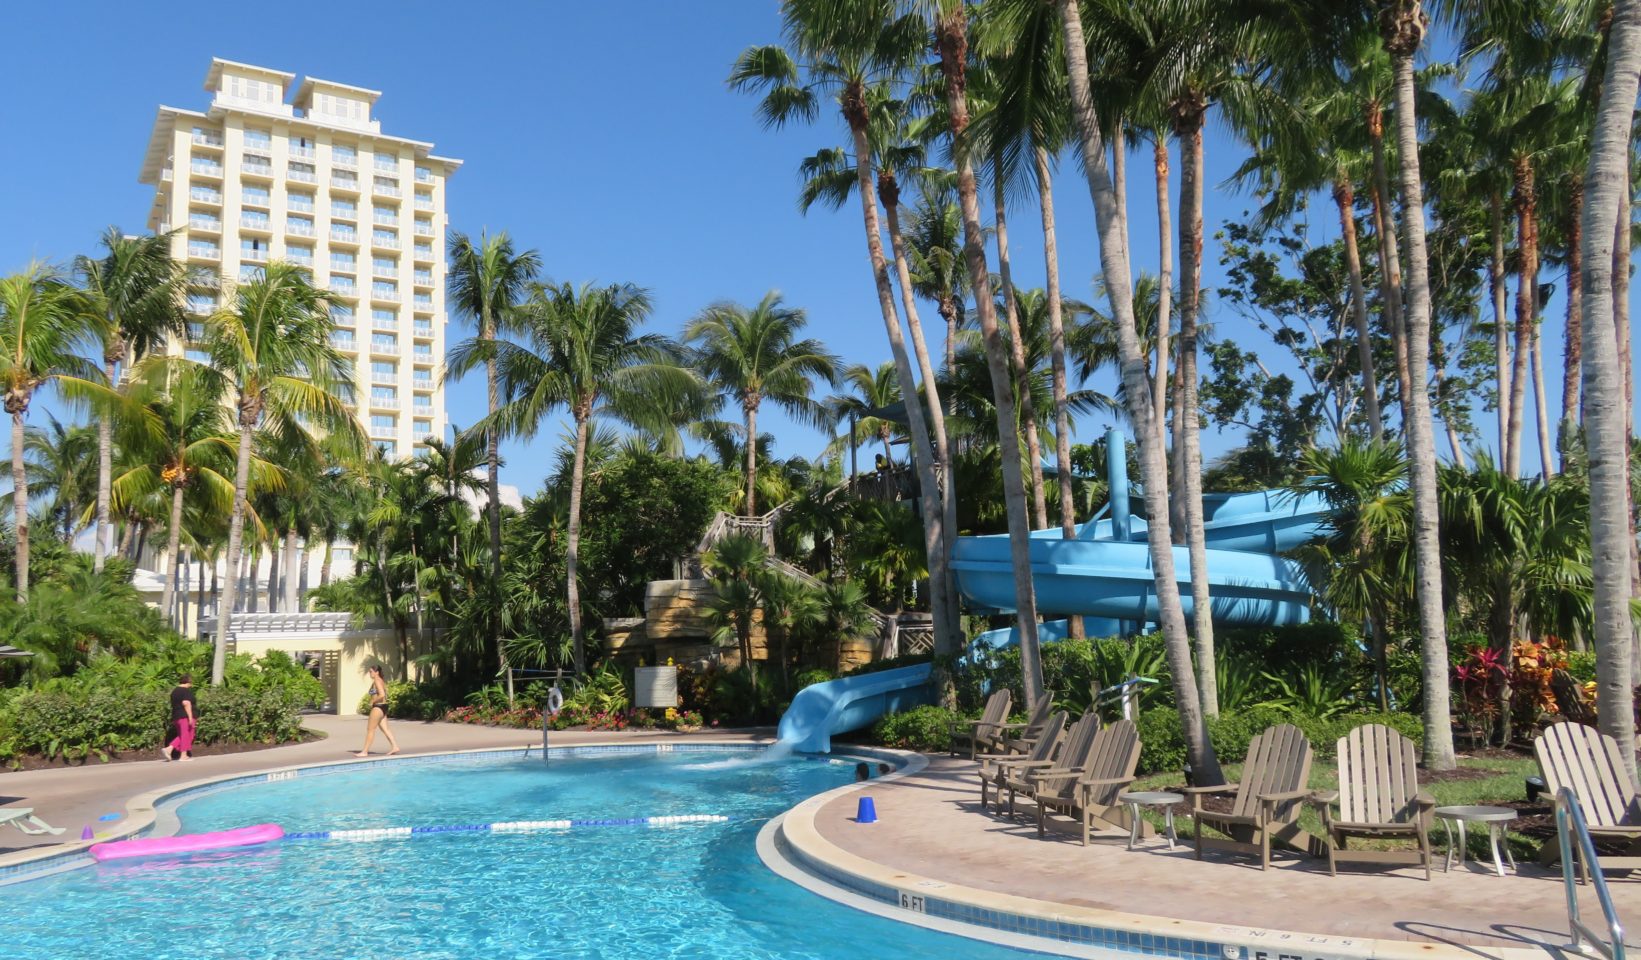 Five water slides and the largest poolscape in south Florida ~ Gem of a Florida Resort